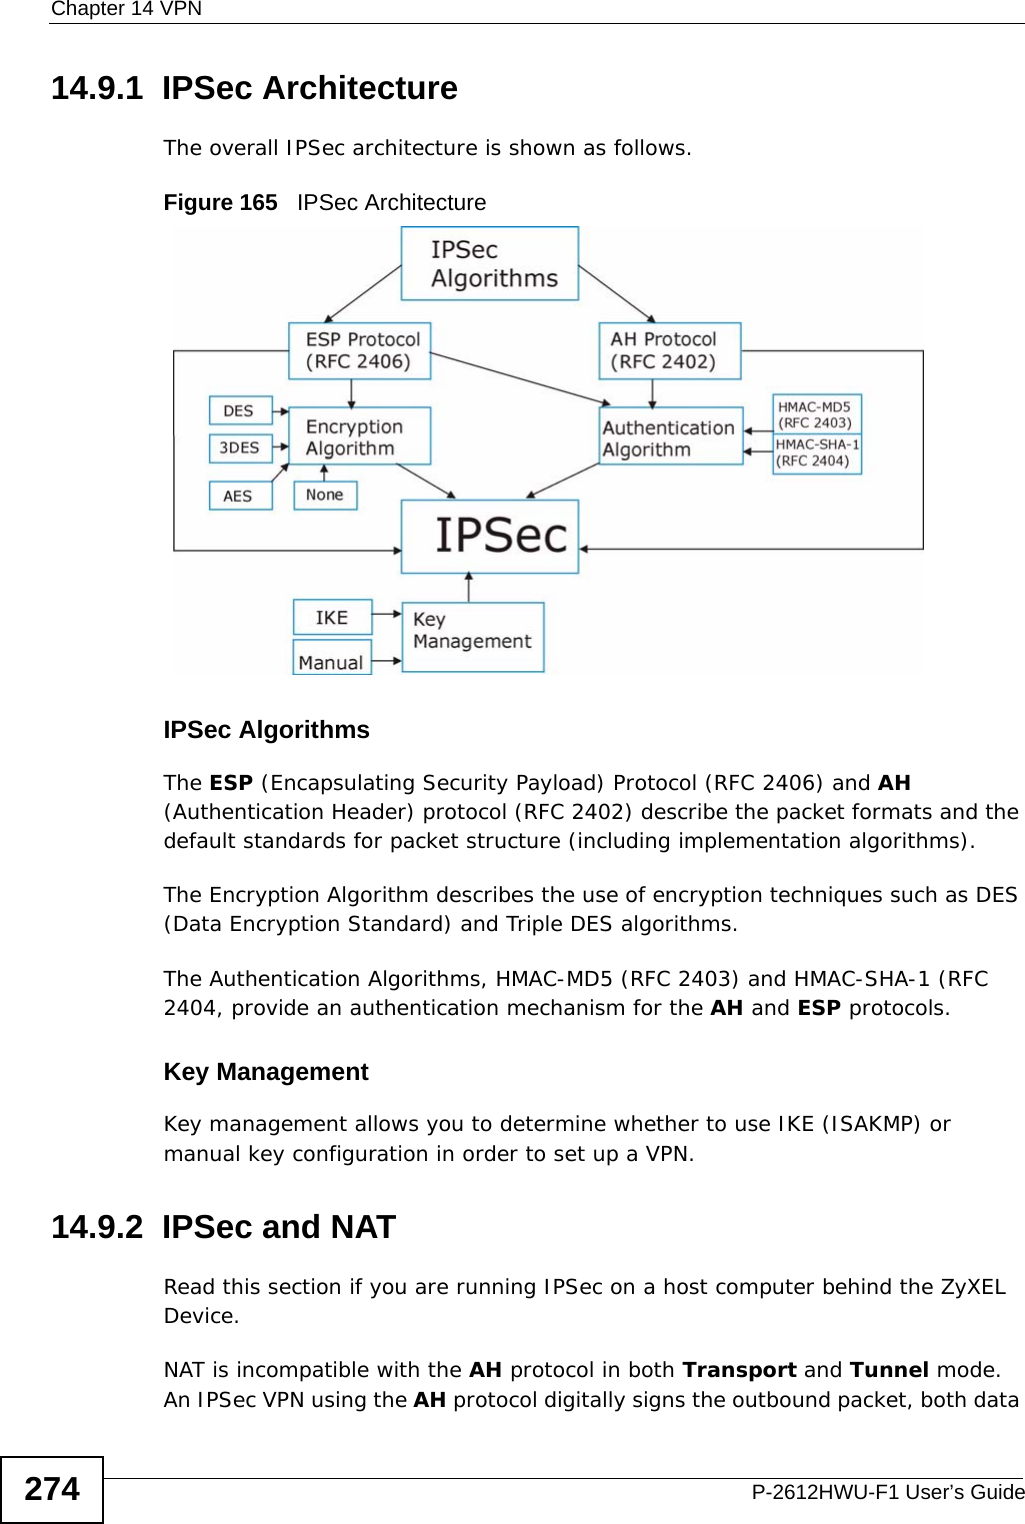 Chapter 14 VPNP-2612HWU-F1 User’s Guide27414.9.1  IPSec ArchitectureThe overall IPSec architecture is shown as follows.Figure 165   IPSec ArchitectureIPSec AlgorithmsThe ESP (Encapsulating Security Payload) Protocol (RFC 2406) and AH (Authentication Header) protocol (RFC 2402) describe the packet formats and the default standards for packet structure (including implementation algorithms).The Encryption Algorithm describes the use of encryption techniques such as DES (Data Encryption Standard) and Triple DES algorithms.The Authentication Algorithms, HMAC-MD5 (RFC 2403) and HMAC-SHA-1 (RFC 2404, provide an authentication mechanism for the AH and ESP protocols. Key ManagementKey management allows you to determine whether to use IKE (ISAKMP) or manual key configuration in order to set up a VPN.14.9.2  IPSec and NATRead this section if you are running IPSec on a host computer behind the ZyXEL Device.NAT is incompatible with the AH protocol in both Transport and Tunnel mode. An IPSec VPN using the AH protocol digitally signs the outbound packet, both data 